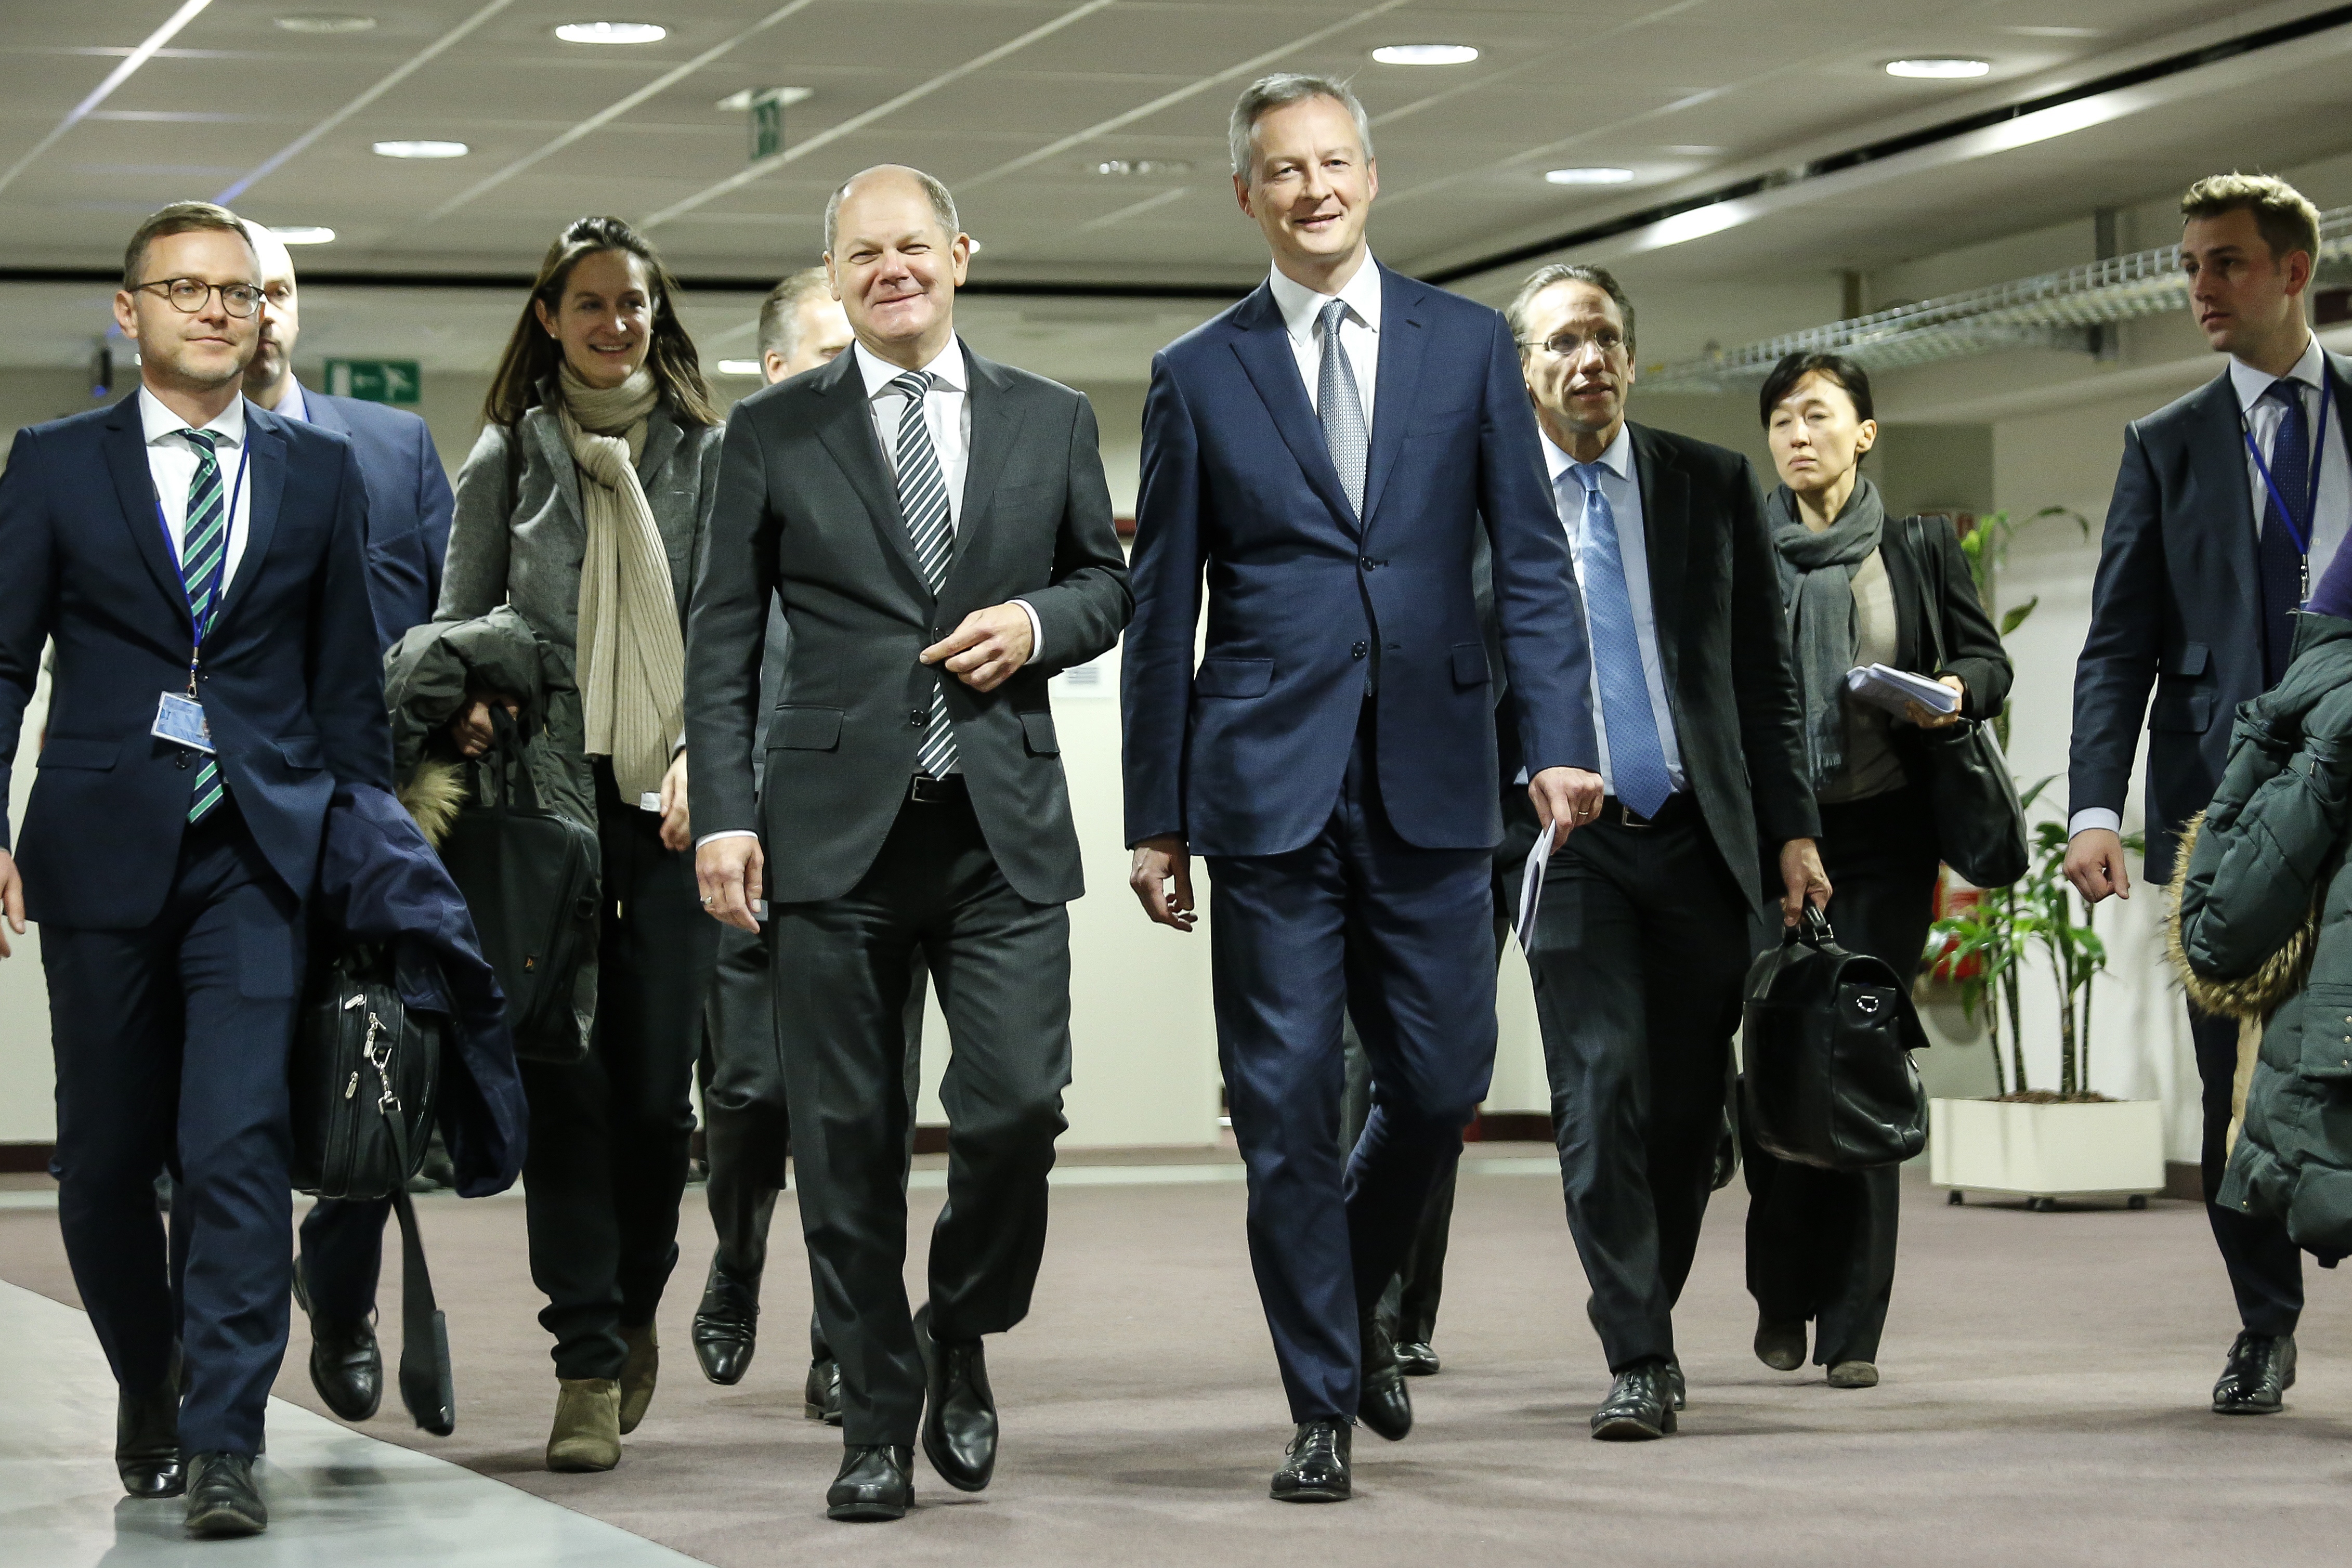 epa07177479 German Finance Minister Olaf Scholz (3-L) and French Finance Minister Bruno Le Maire (4-L) arrive to hold a joint news conference after a Special Eurogroup Finance Ministers' meeting in Brussels, Belgium, 19 November 2018. The Eurogroup focused on Italy's budget crisis.  EPA/JULIEN WARNAND